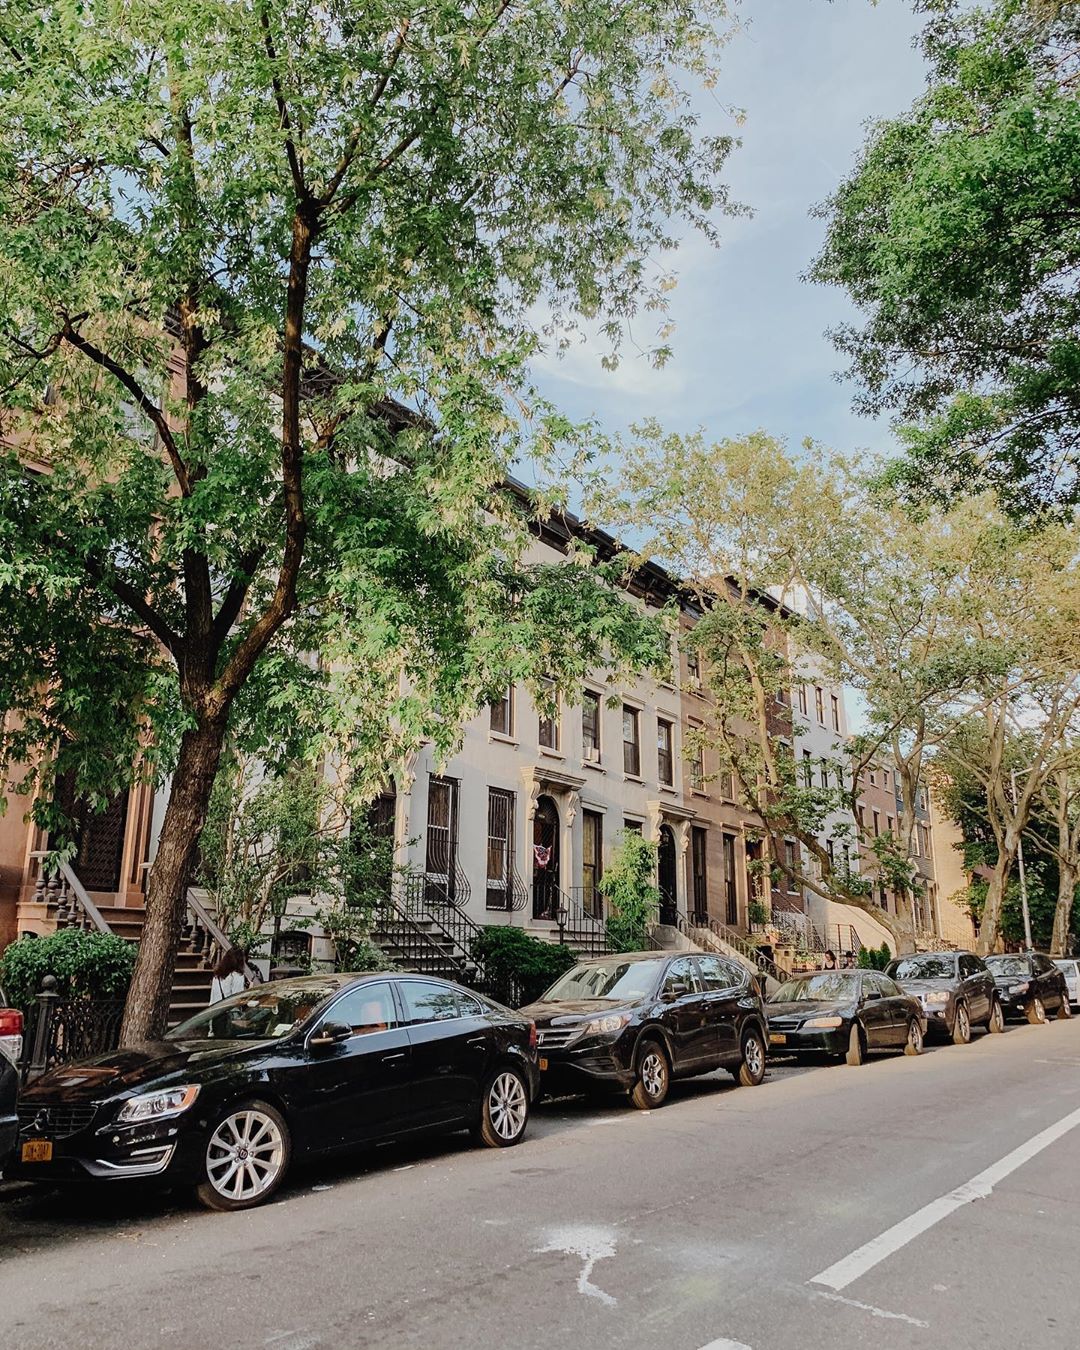 Dark tan rowhouses covered by large green trees. Photo by Instagram user @yourgirlkath